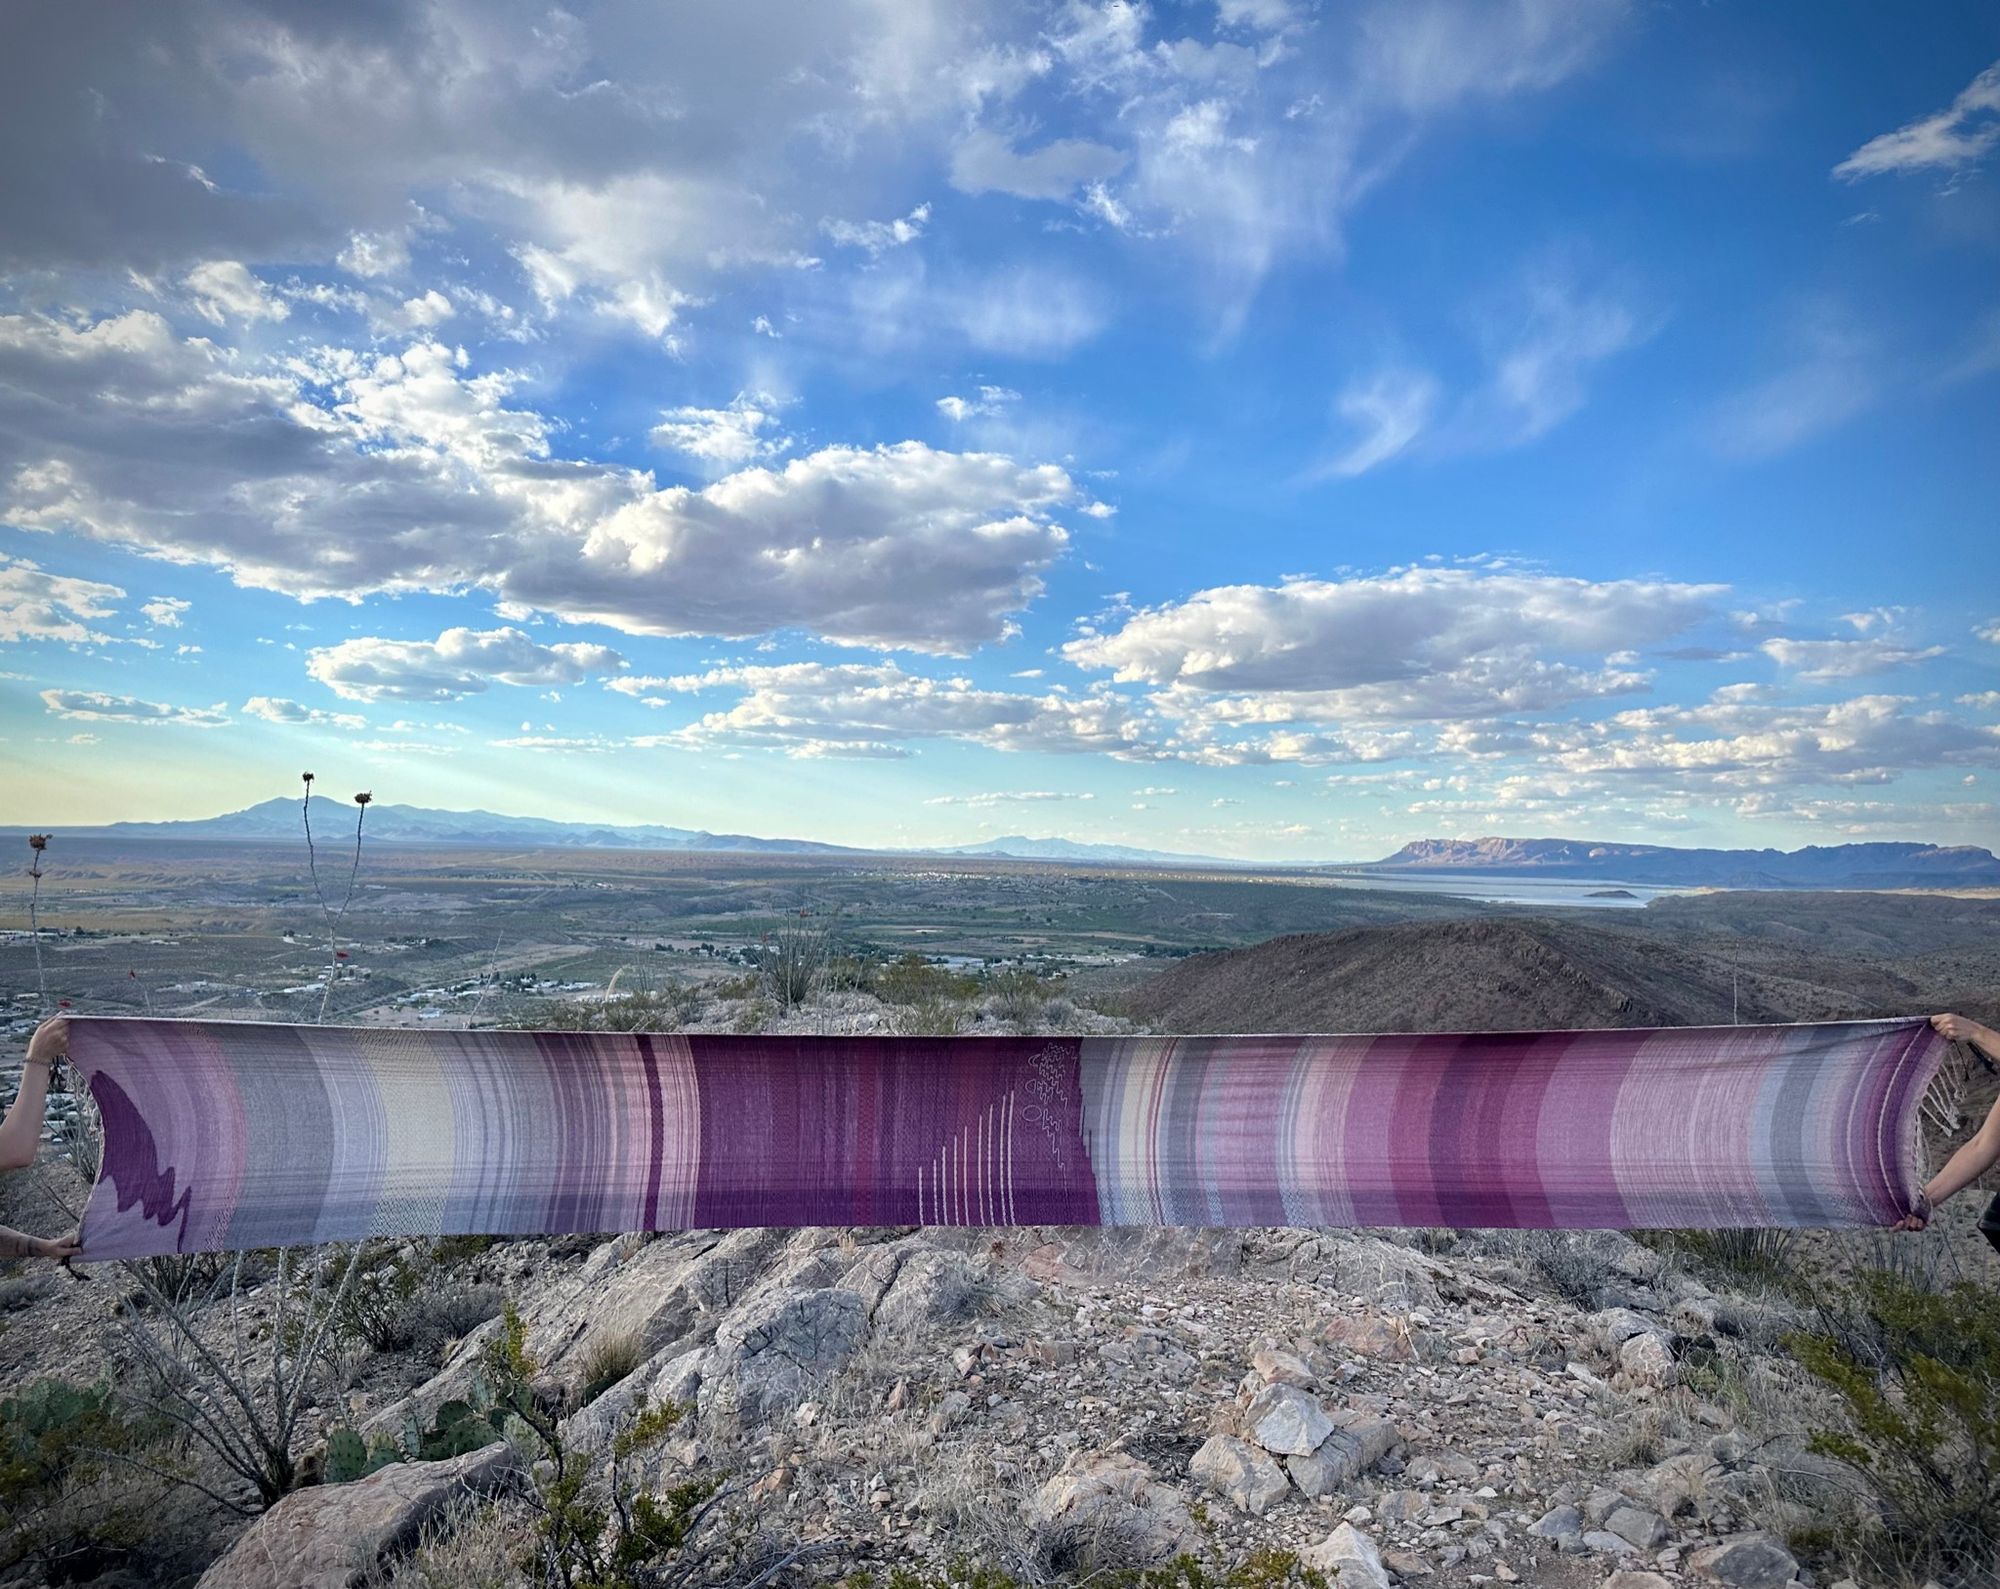 four hands hold out a piece of handwoven fabric that is naturally dyed with cochineal in all shades of pink and fuchsia against a mountain desert landscape